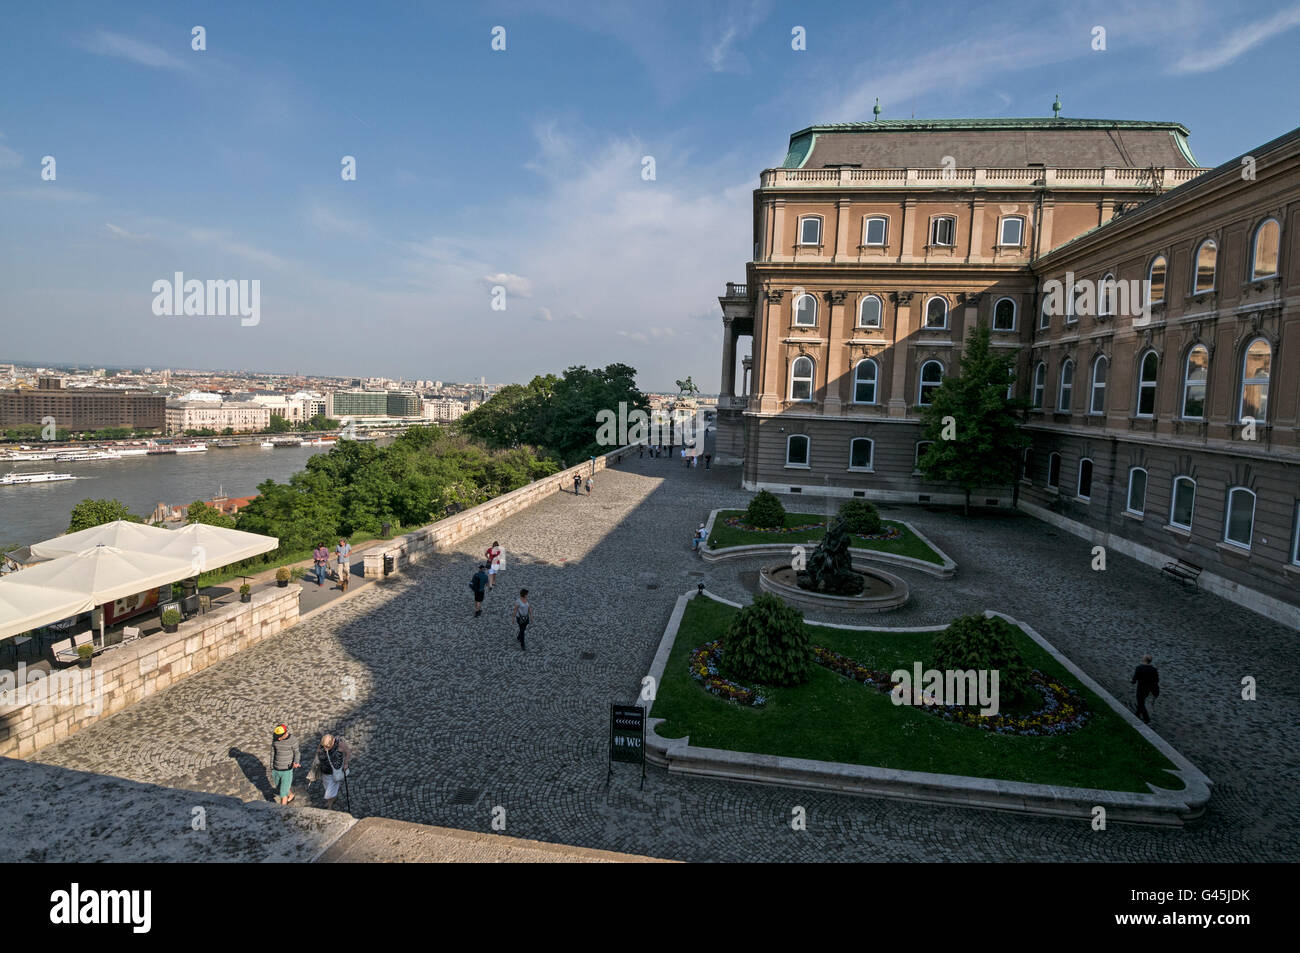 Budapest Terrace beside the former Royal Palace which is the Hungarian National Gallery on Buda Castle Hill in Budapest, Hungary. The National Galler Stock Photo